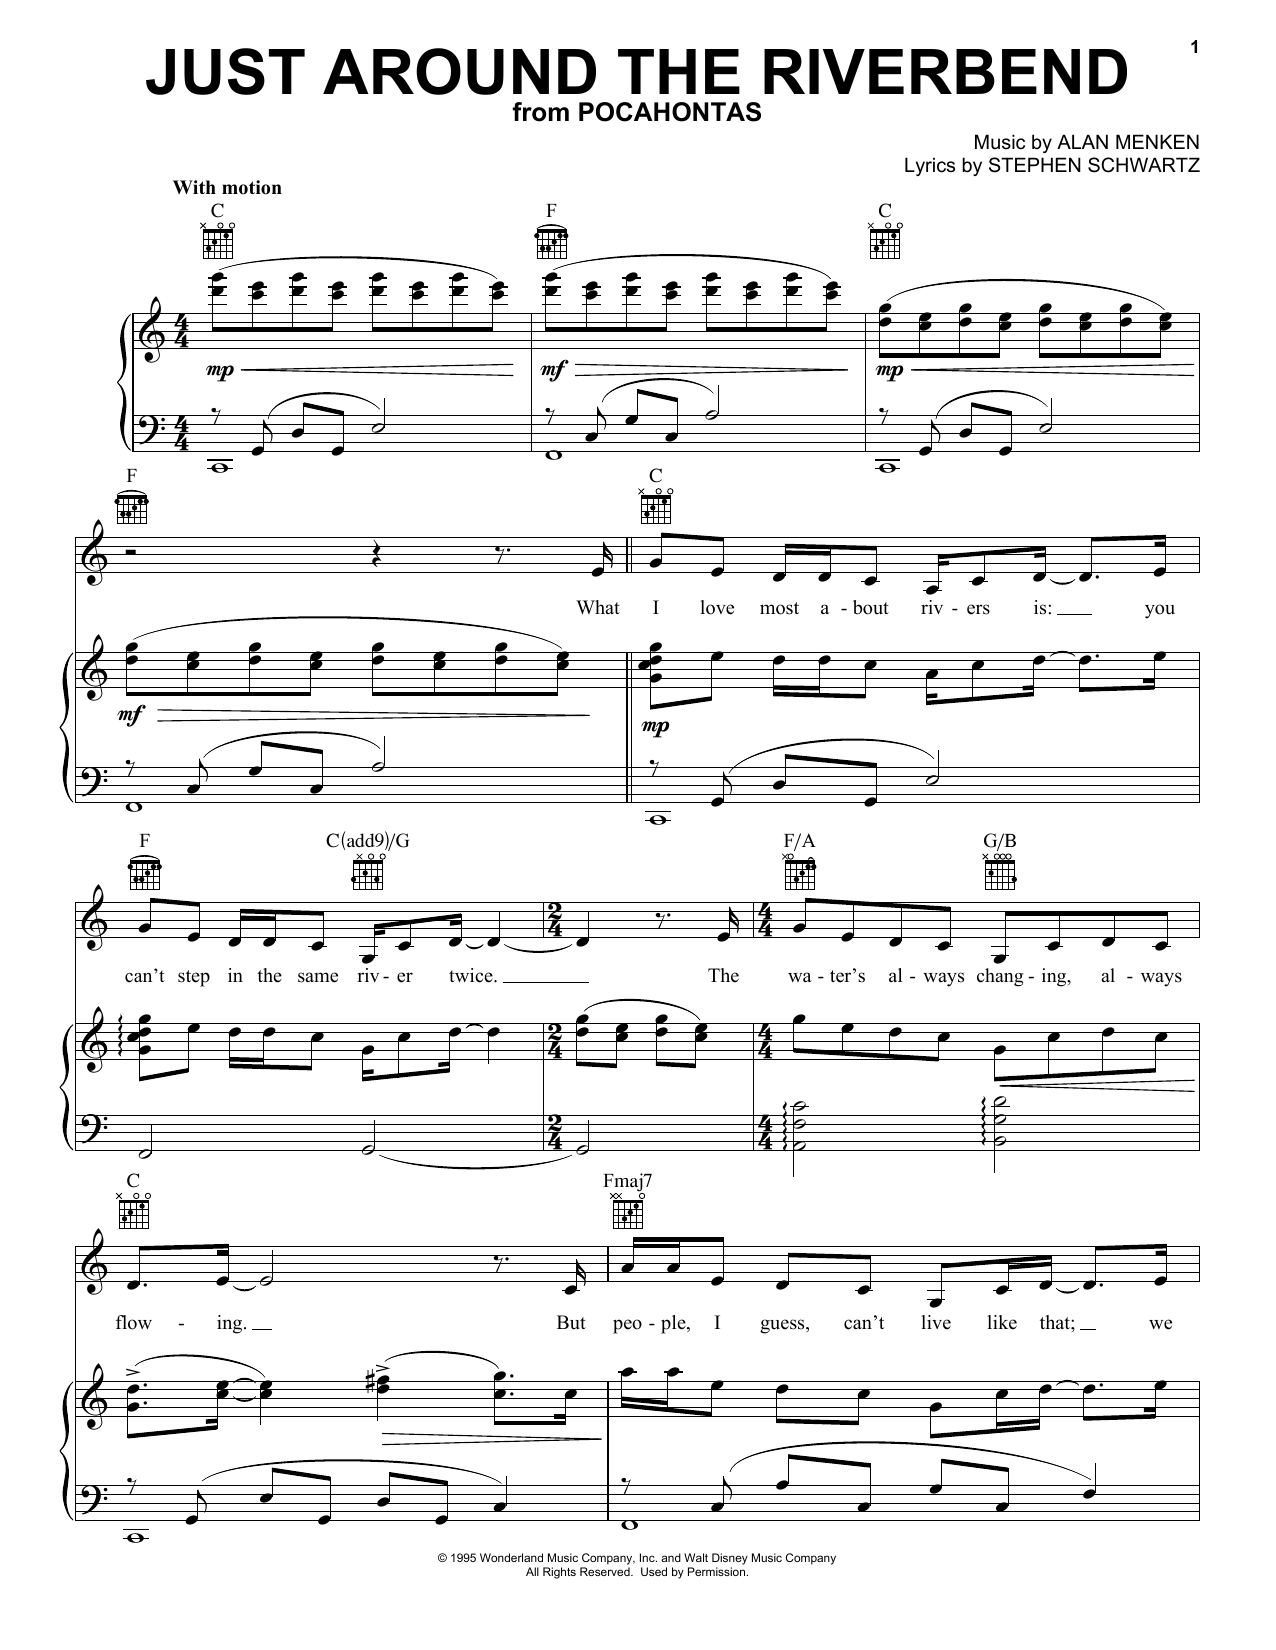 Alan Menken Just Around The Riverbend (from Pocahontas) sheet music notes and chords. Download Printable PDF.